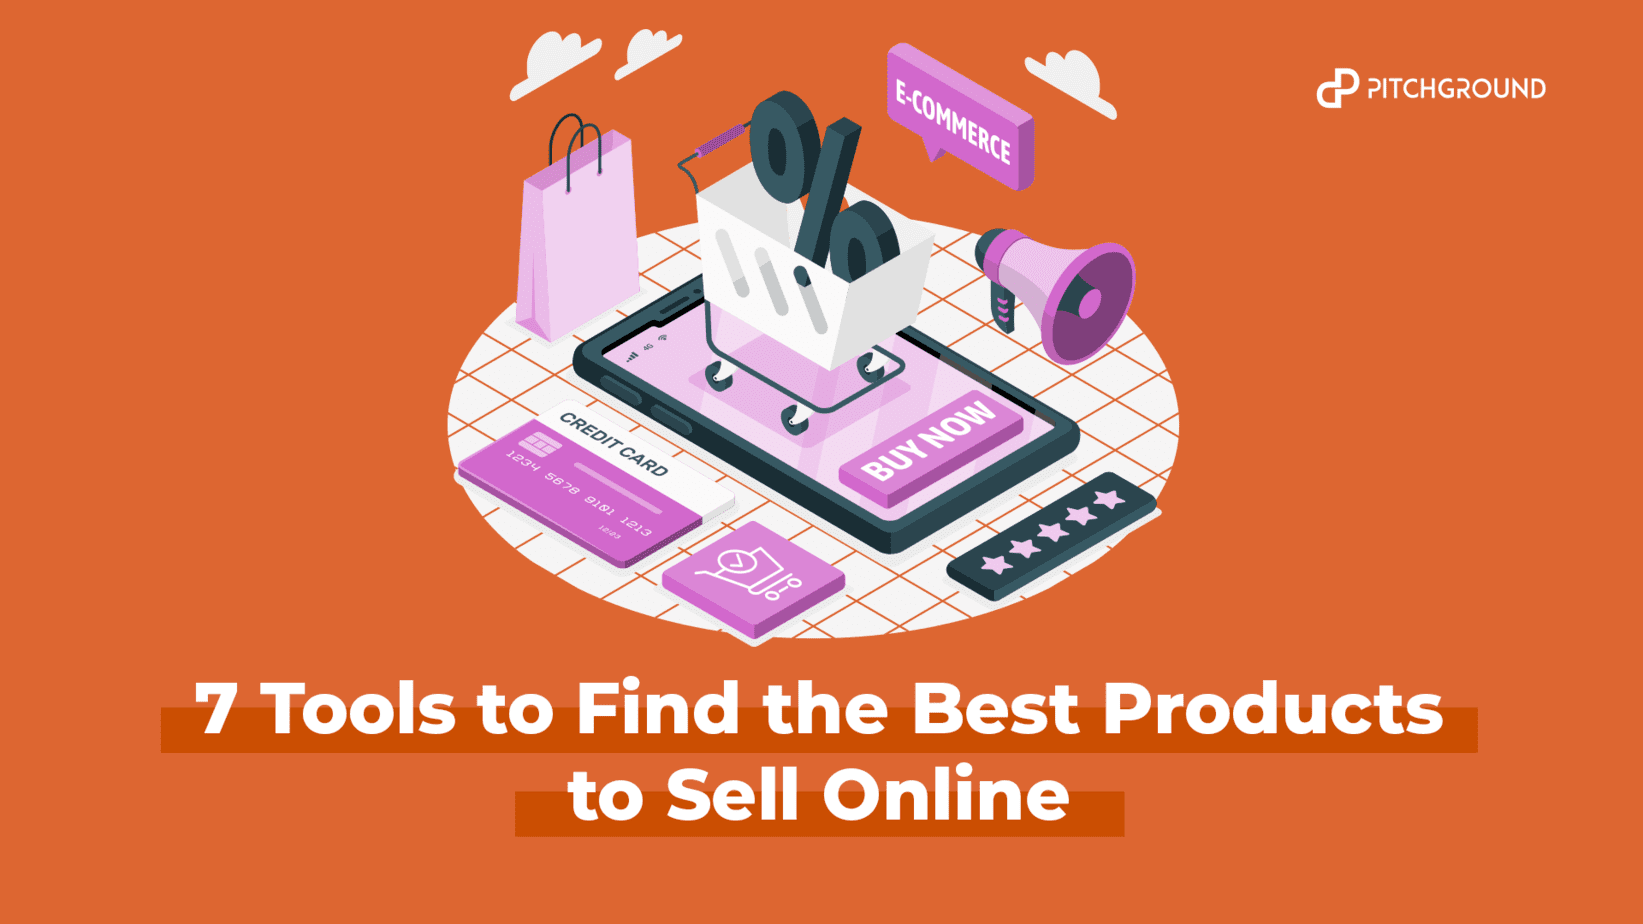 best products to sell online